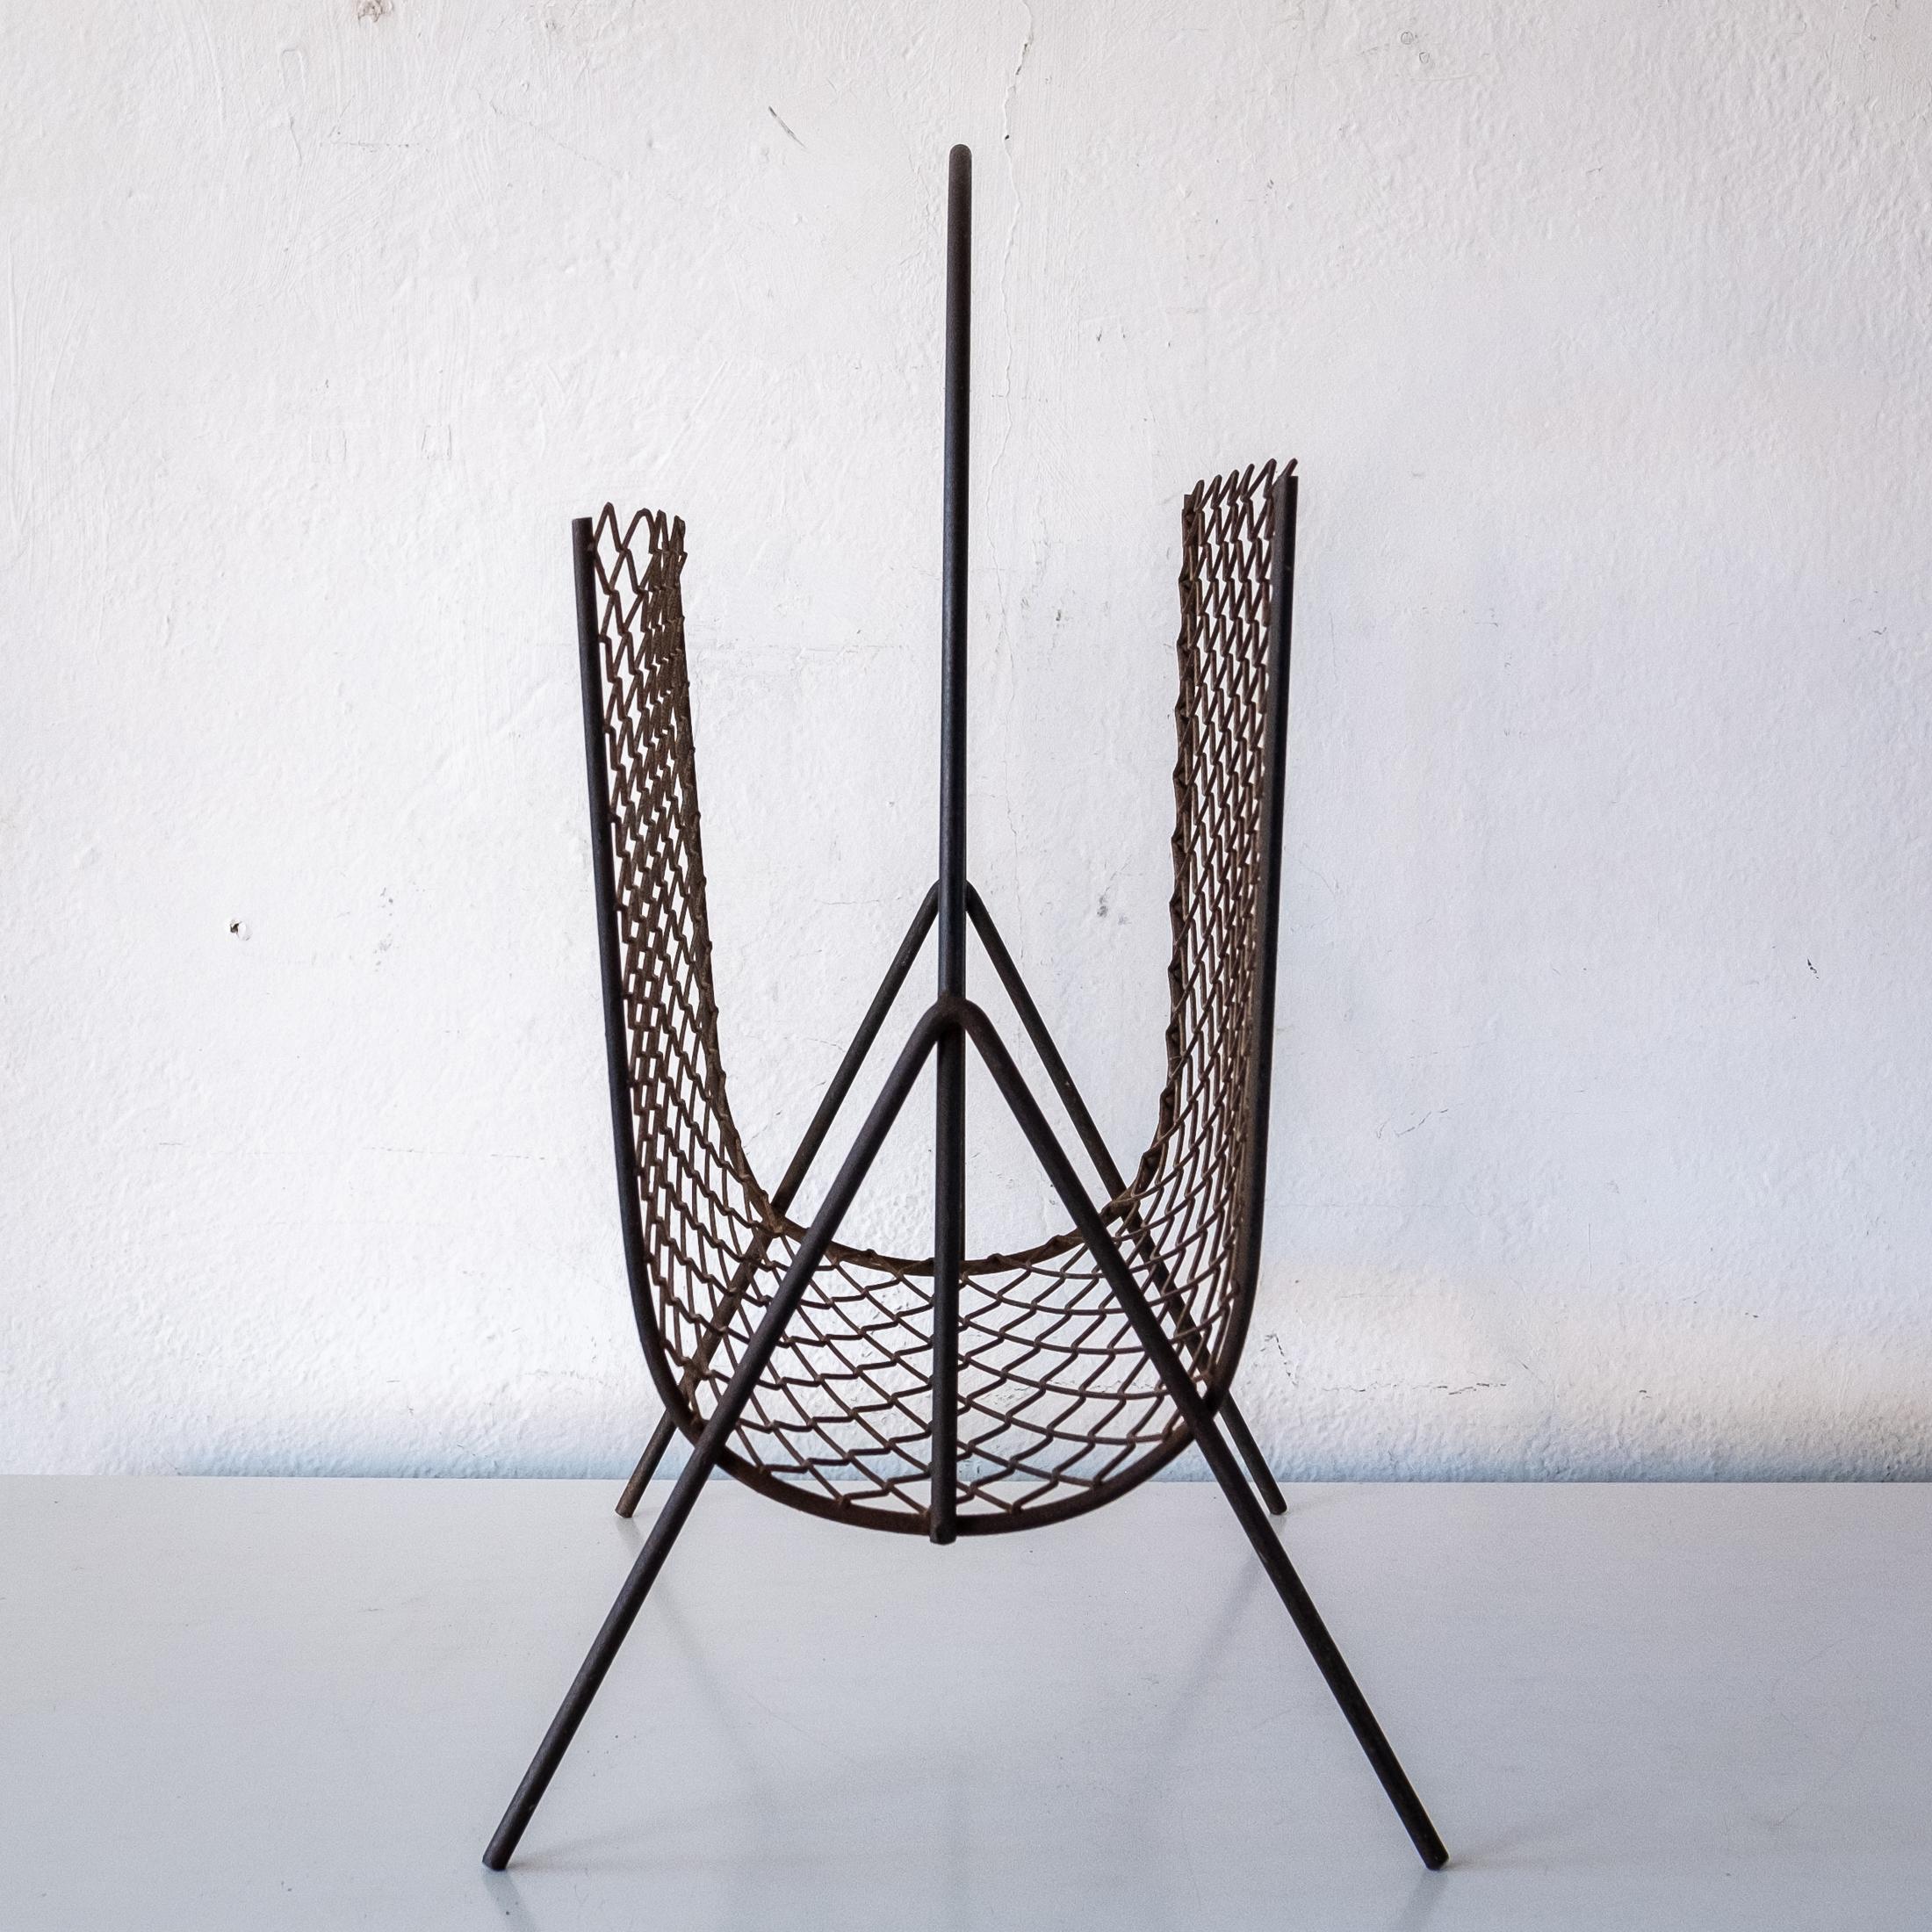 Midcentury 1940s Expanded Metal and Iron Magazine Rack In Good Condition For Sale In San Diego, CA